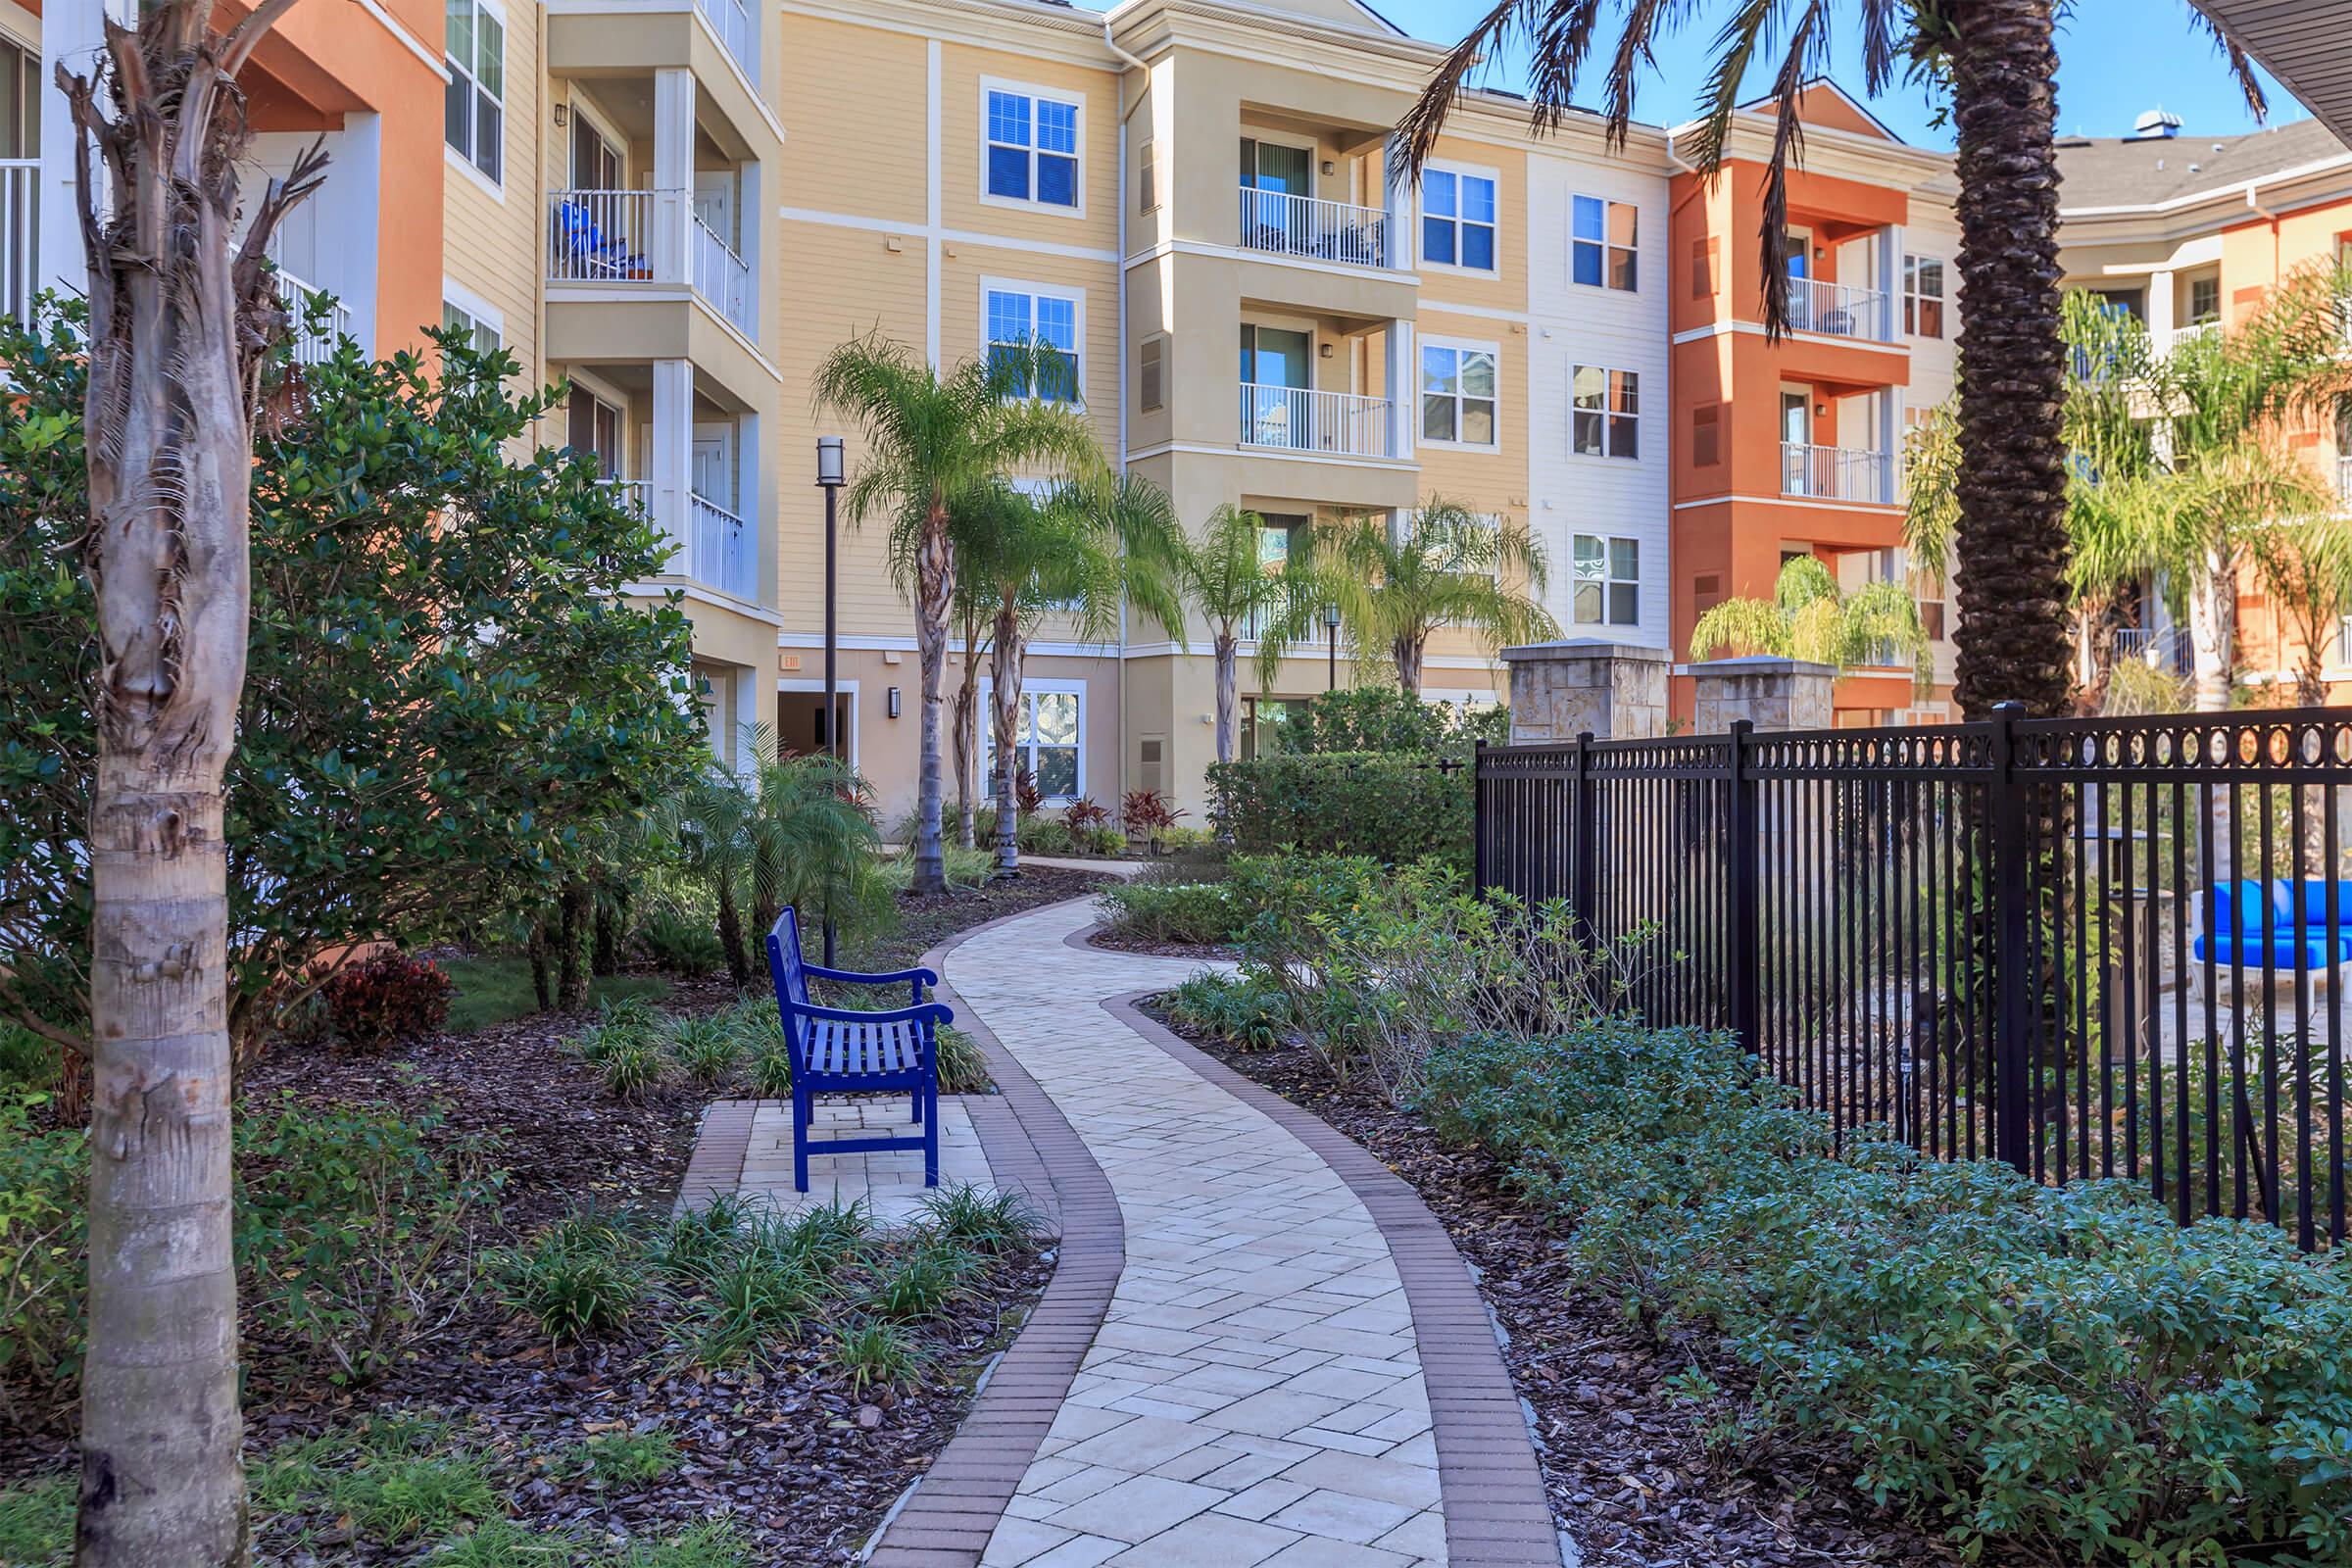 Landscaping at RiZE at Winter Springs Apartments in Winter Springs, FL